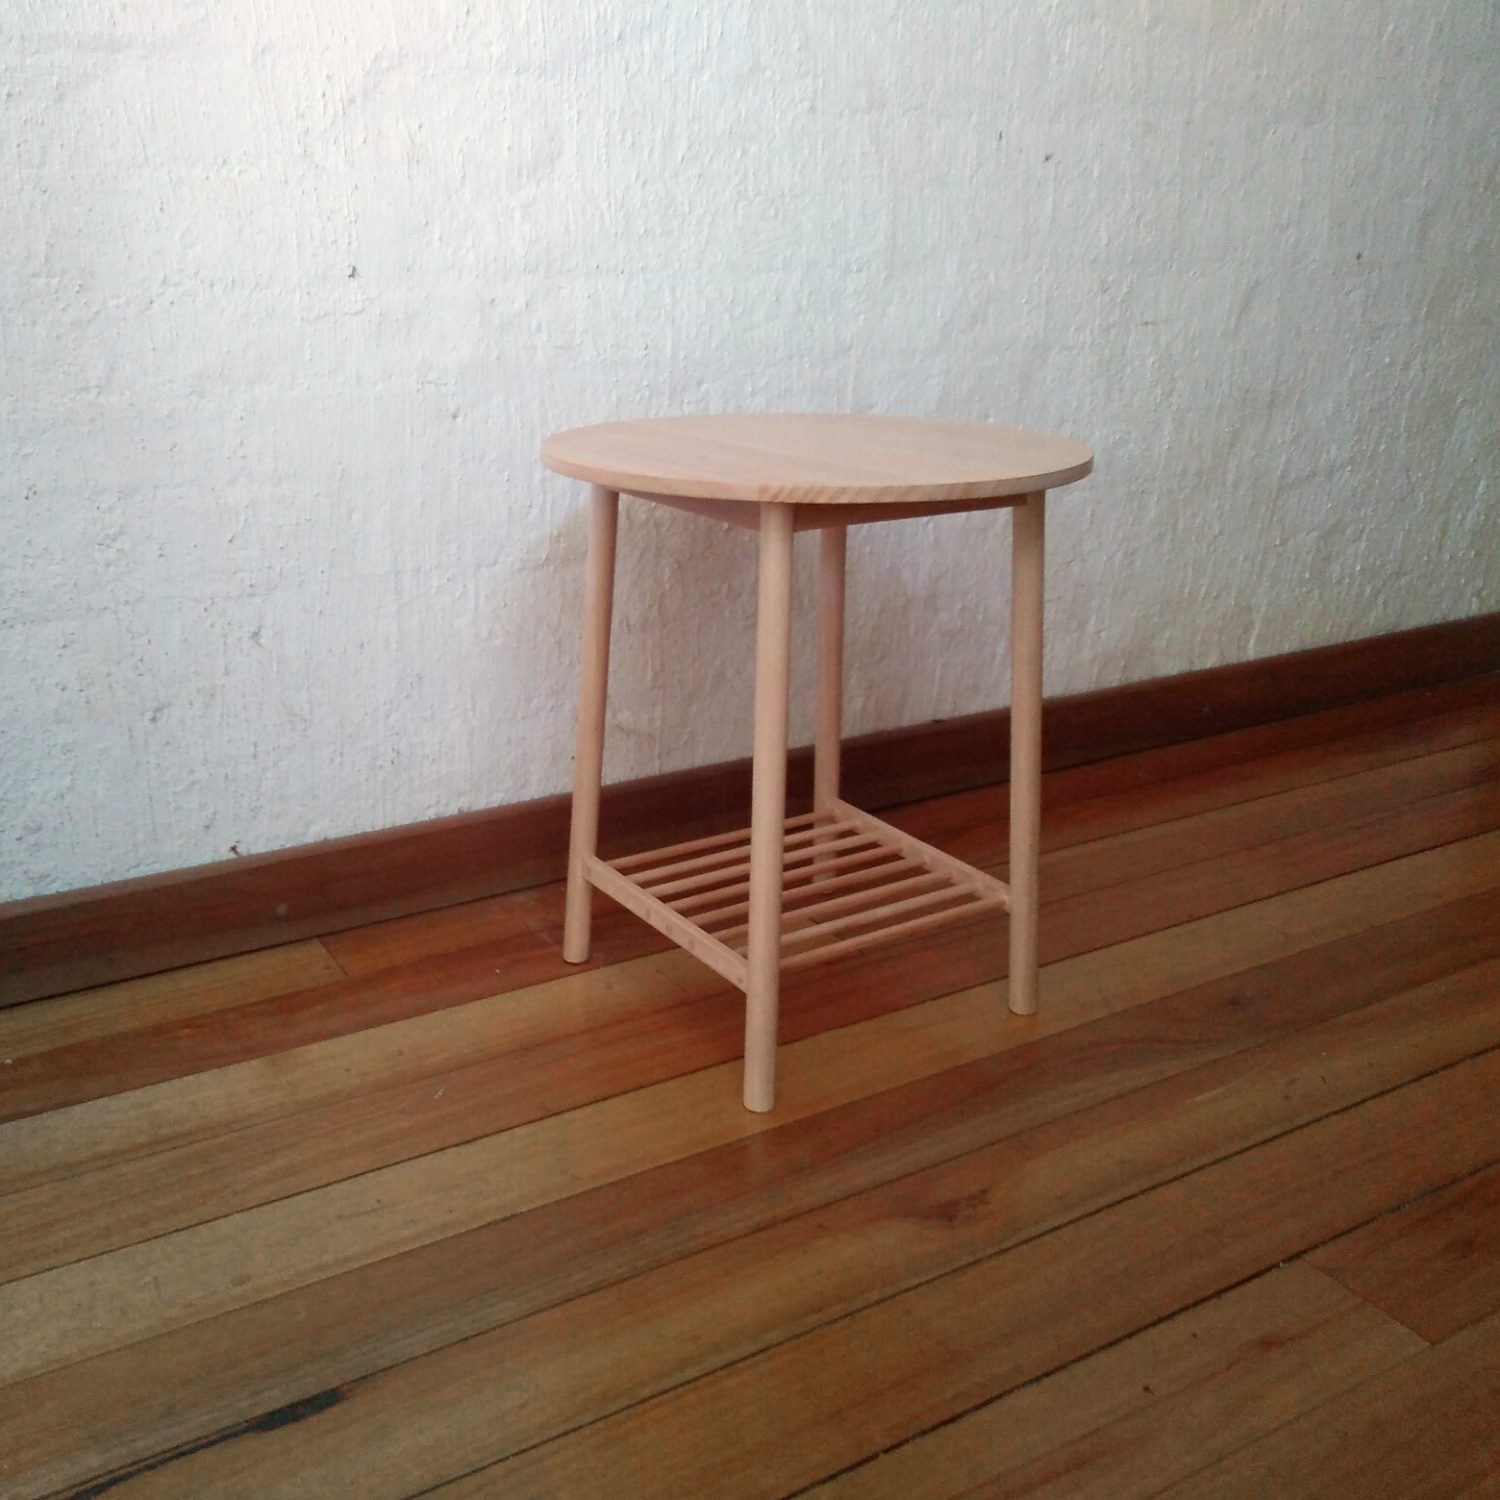 Wooden side table with a round top, round section legs and a shelf made from dowels